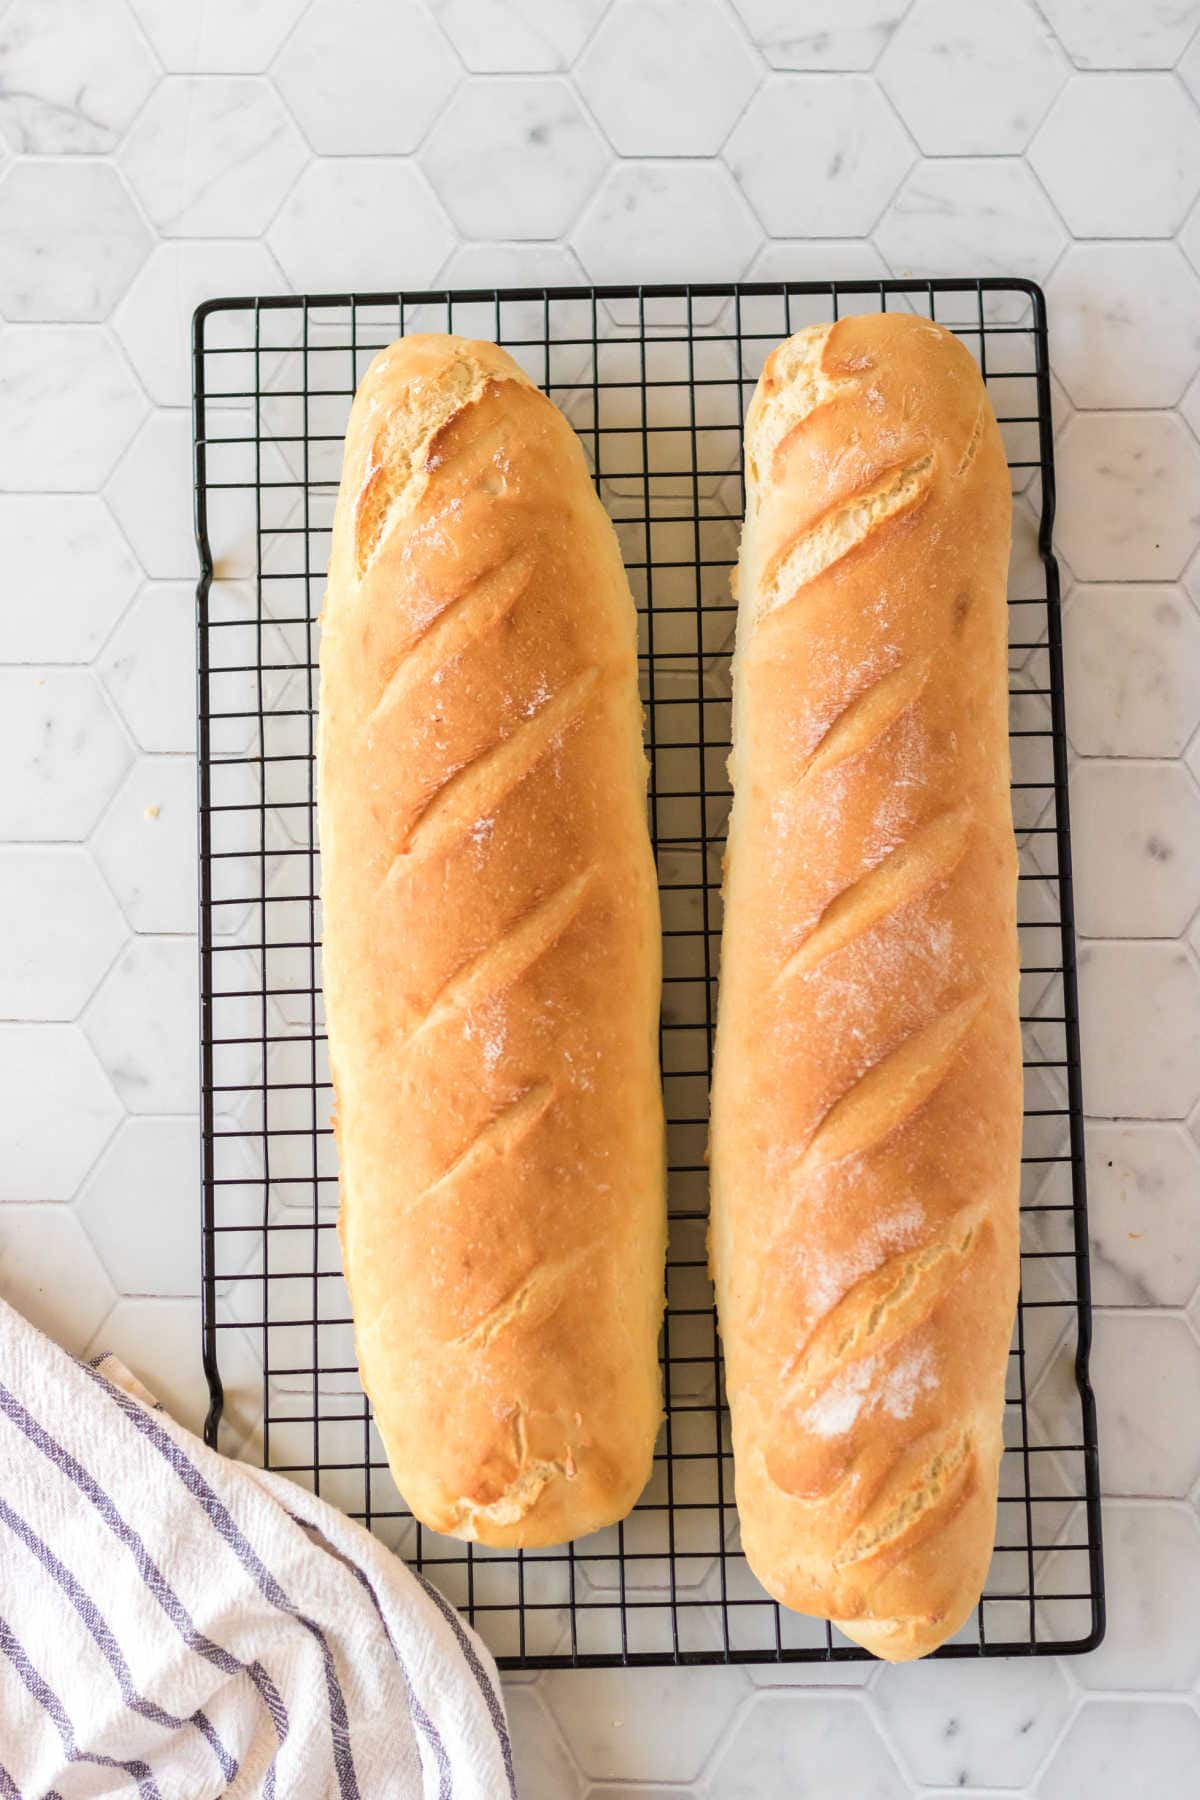 Homemade baguette next to another.